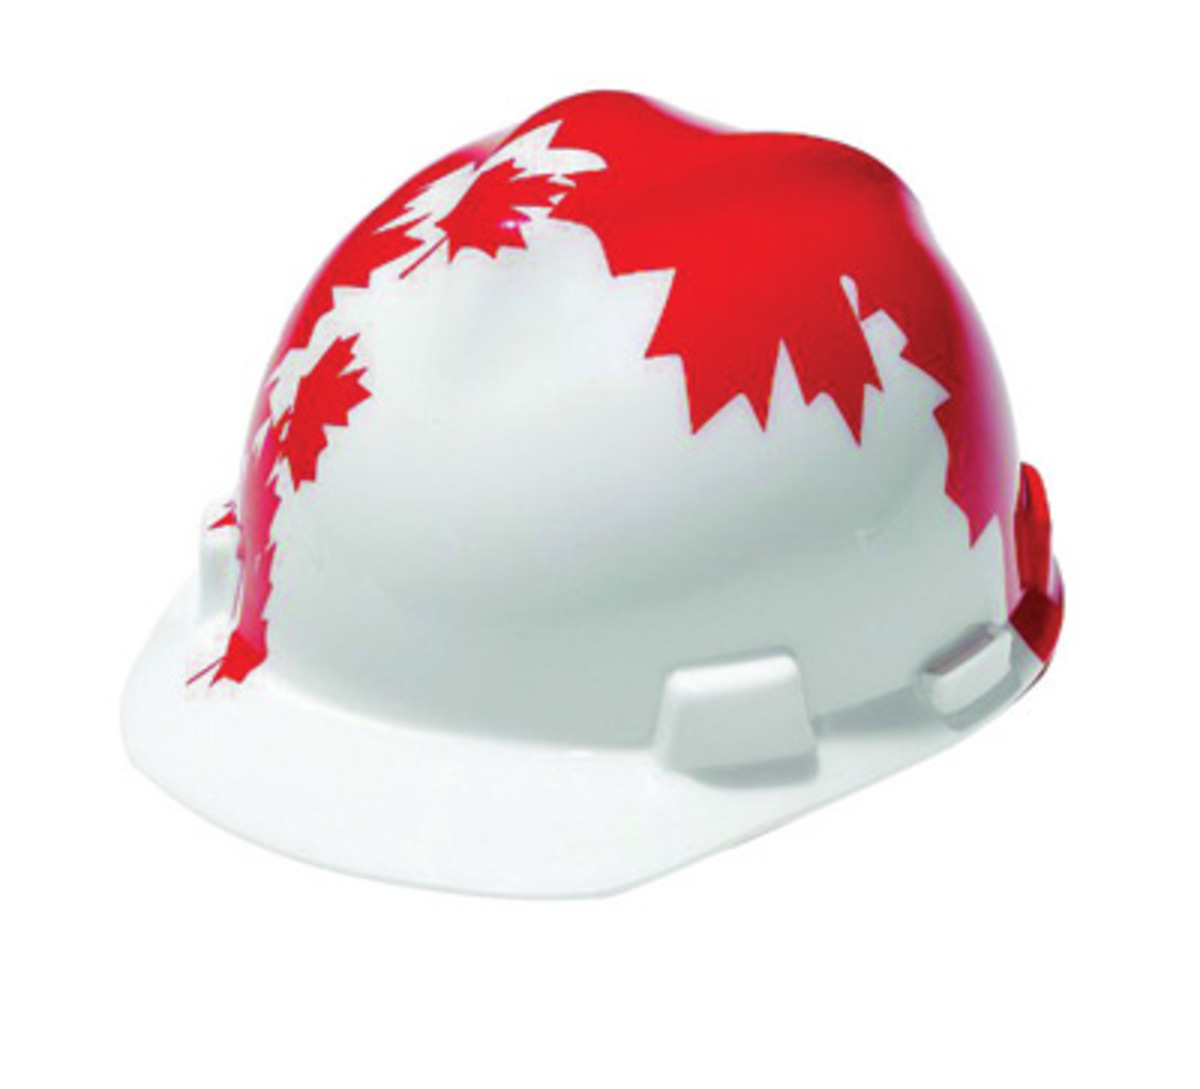 MSA Red Polyethylene Cap Style Hard Hat With Ratchet/4 Point Ratchet Suspension